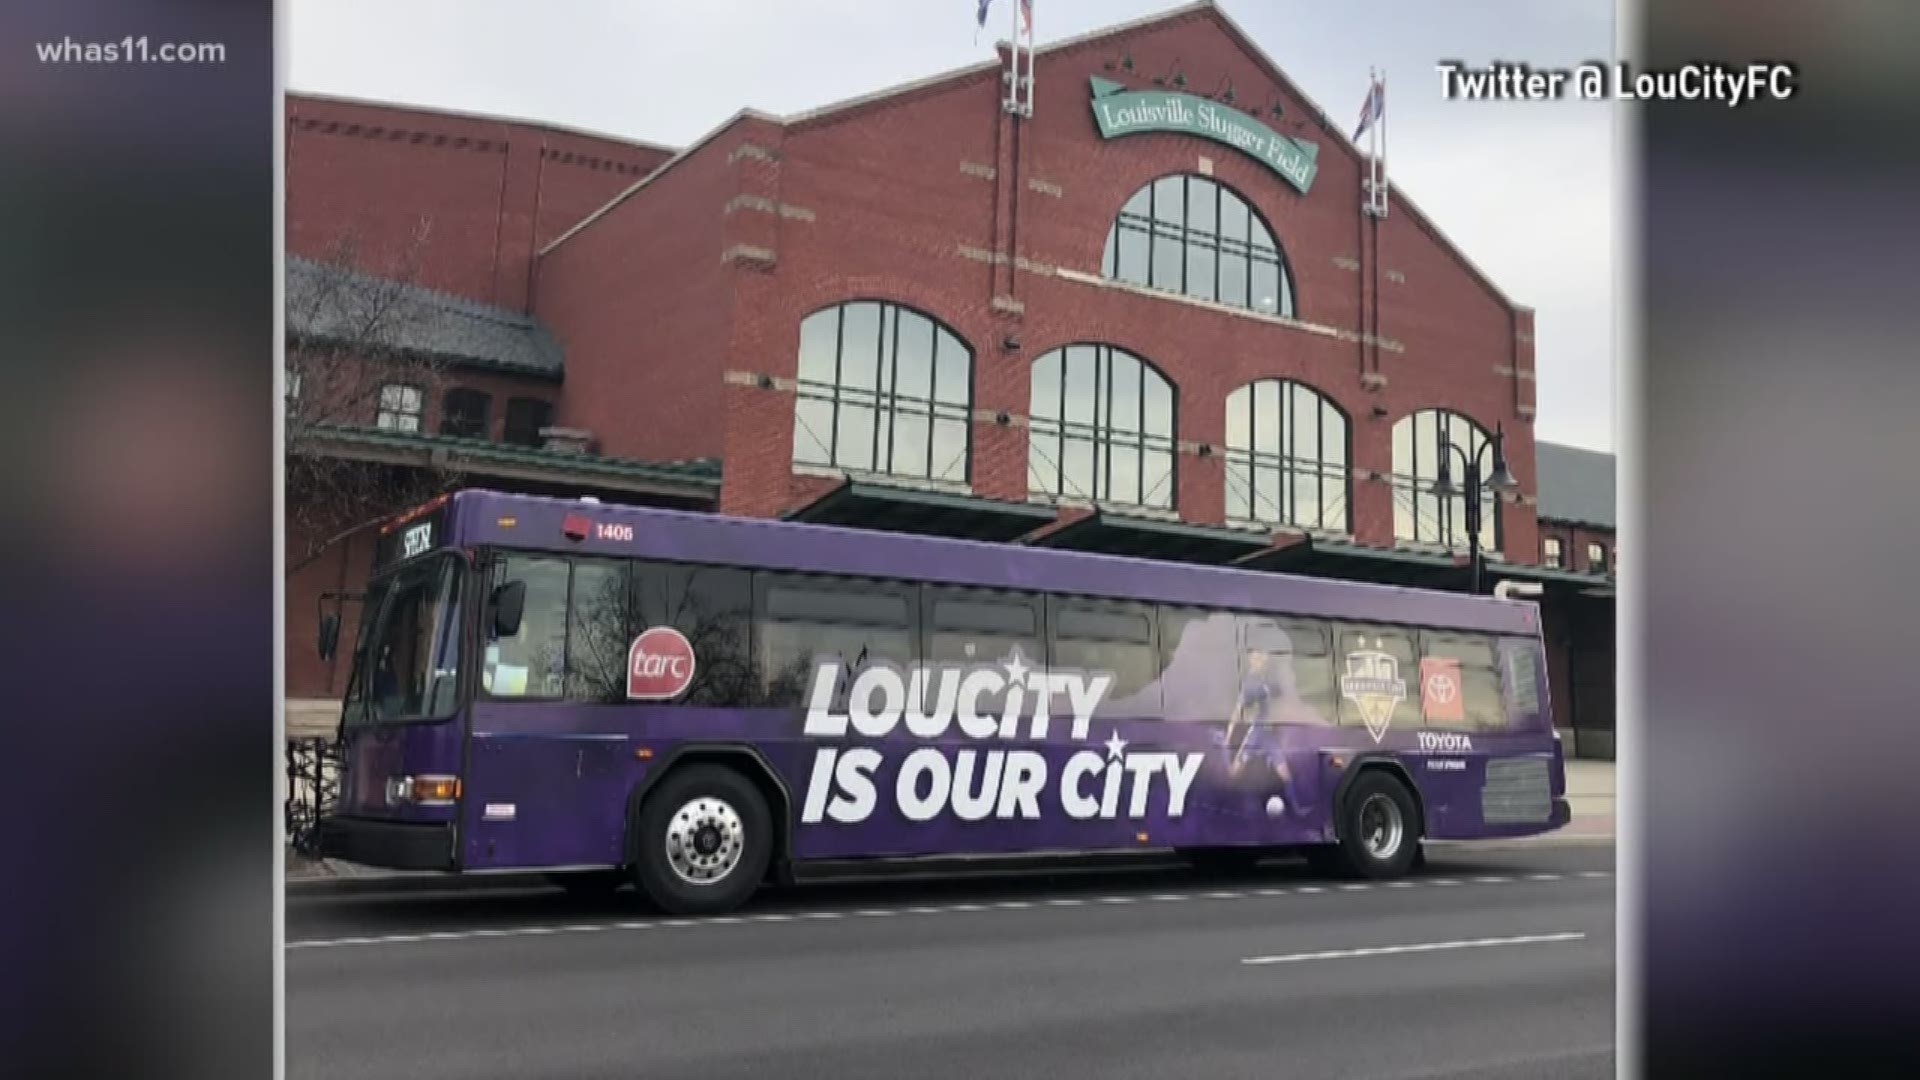 This excitement is leading up to LouCity's home-opener on Saturday, March 23, at Slugger Field. Lou City plays against Hartford Athletic at 7 p.m.